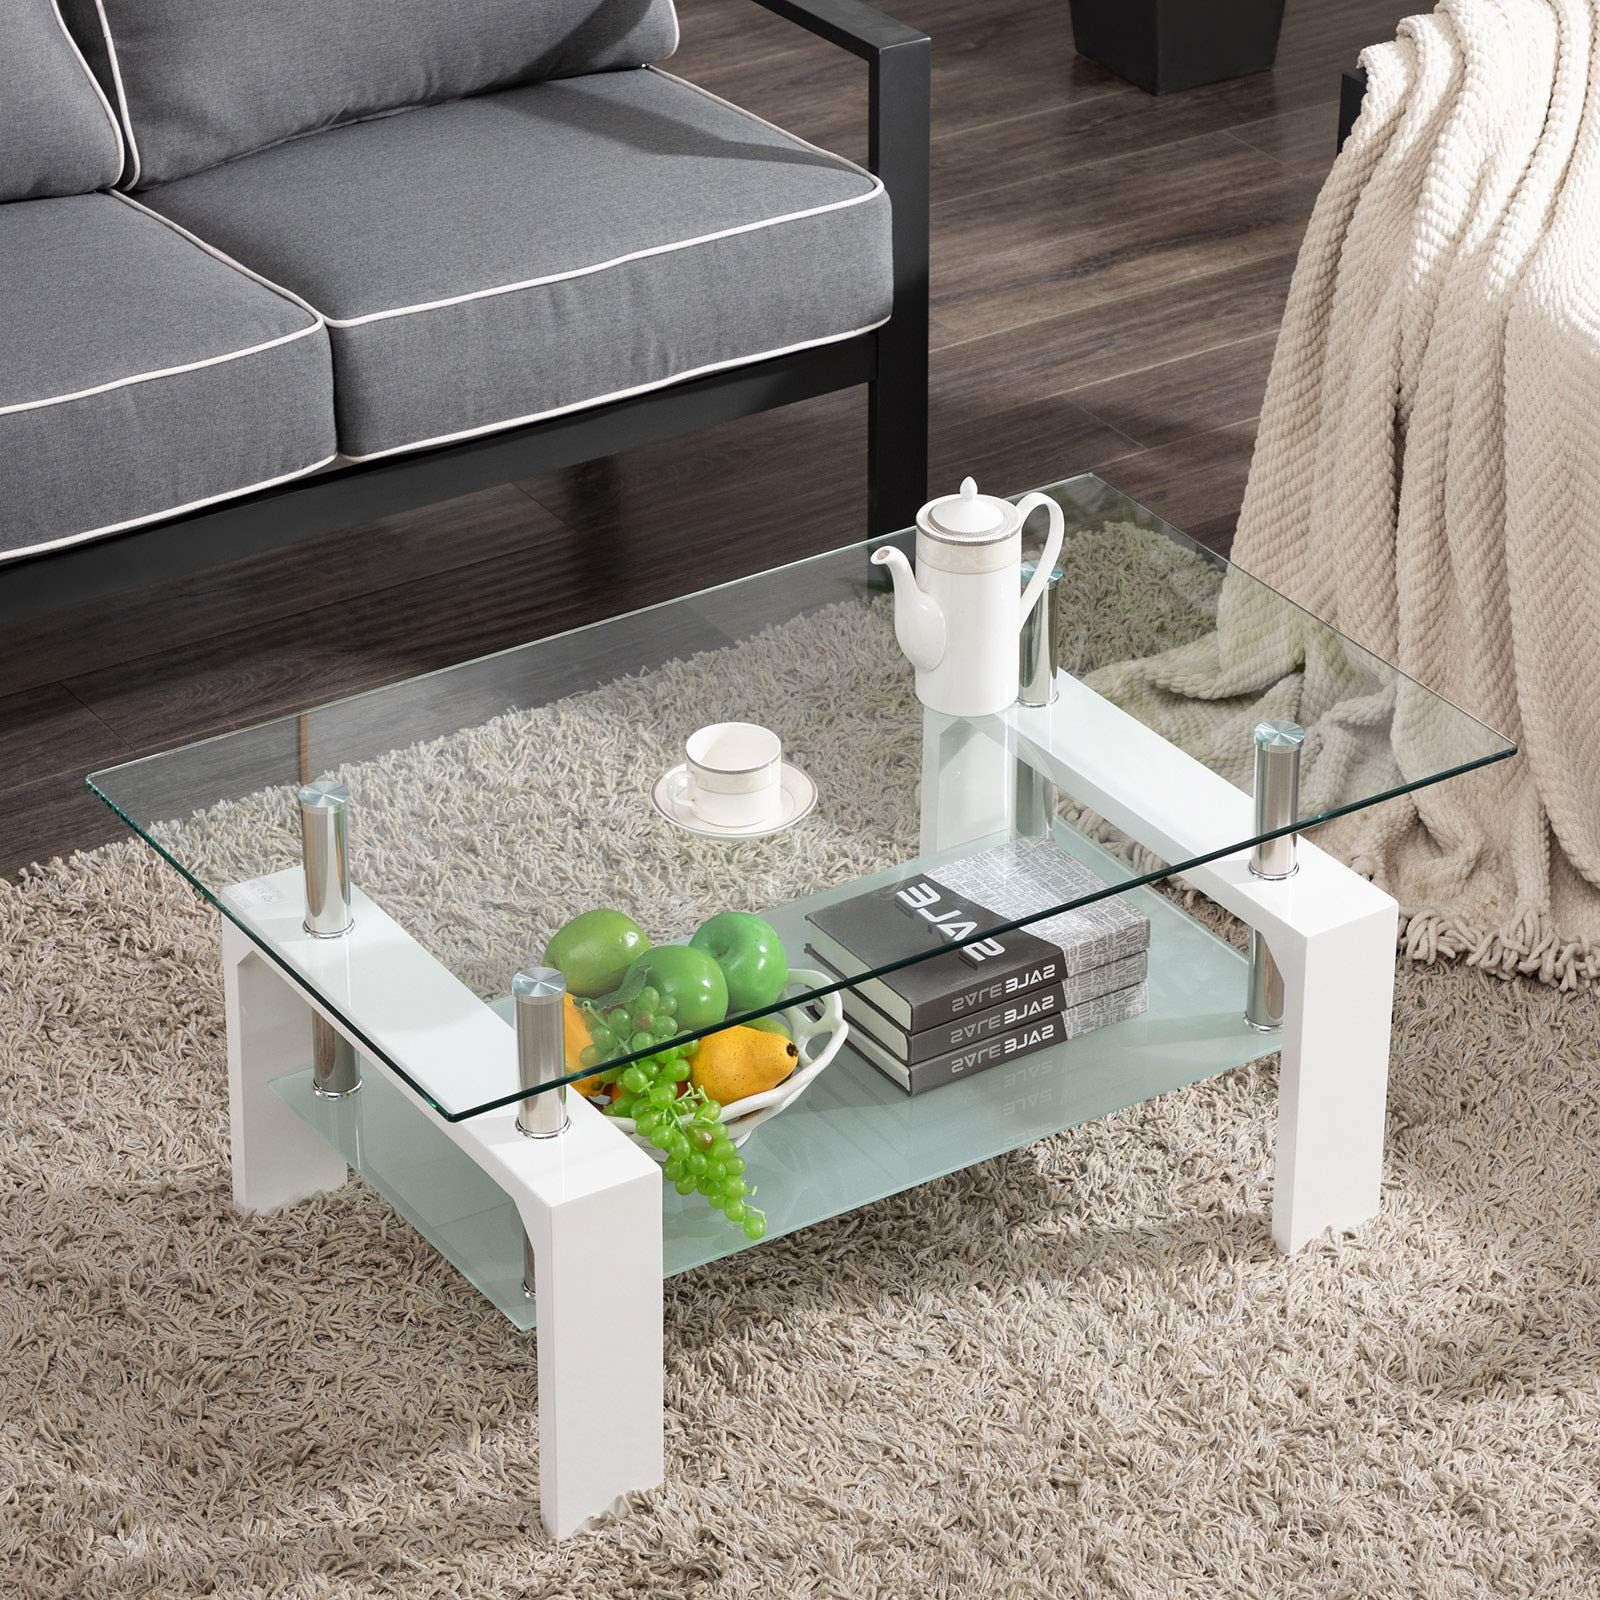 Most Current Glass Coffee Tables With Lower Shelves Inside Amazon: Living Room Rectangle Glass Coffee Table, Modern Living Room  Table With Lower Shelf, Clear Tempered Glass Top With White Color Wooden  Legs,living Room Furniture,waiting Area Table : Home & Kitchen (View 3 of 10)